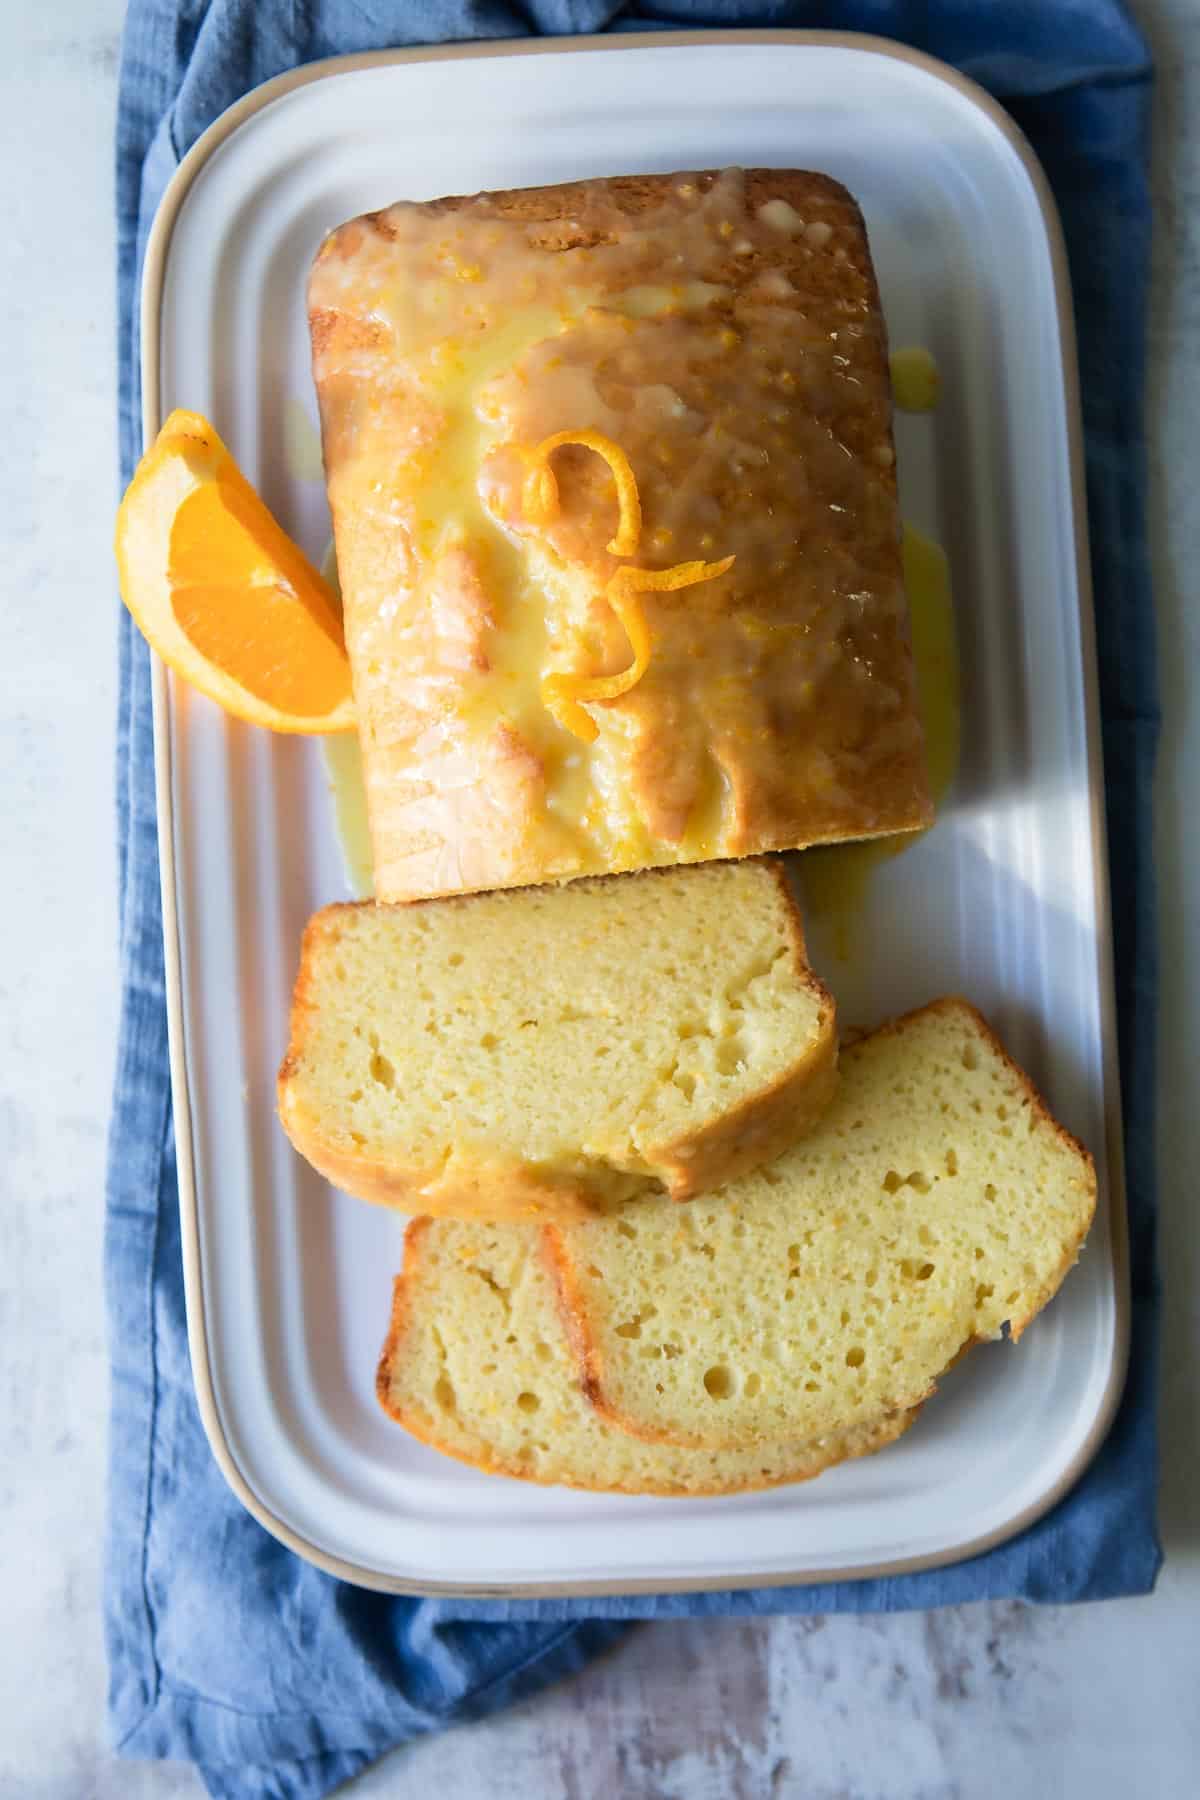 A fully baked orange loaf cake with slices cut off.